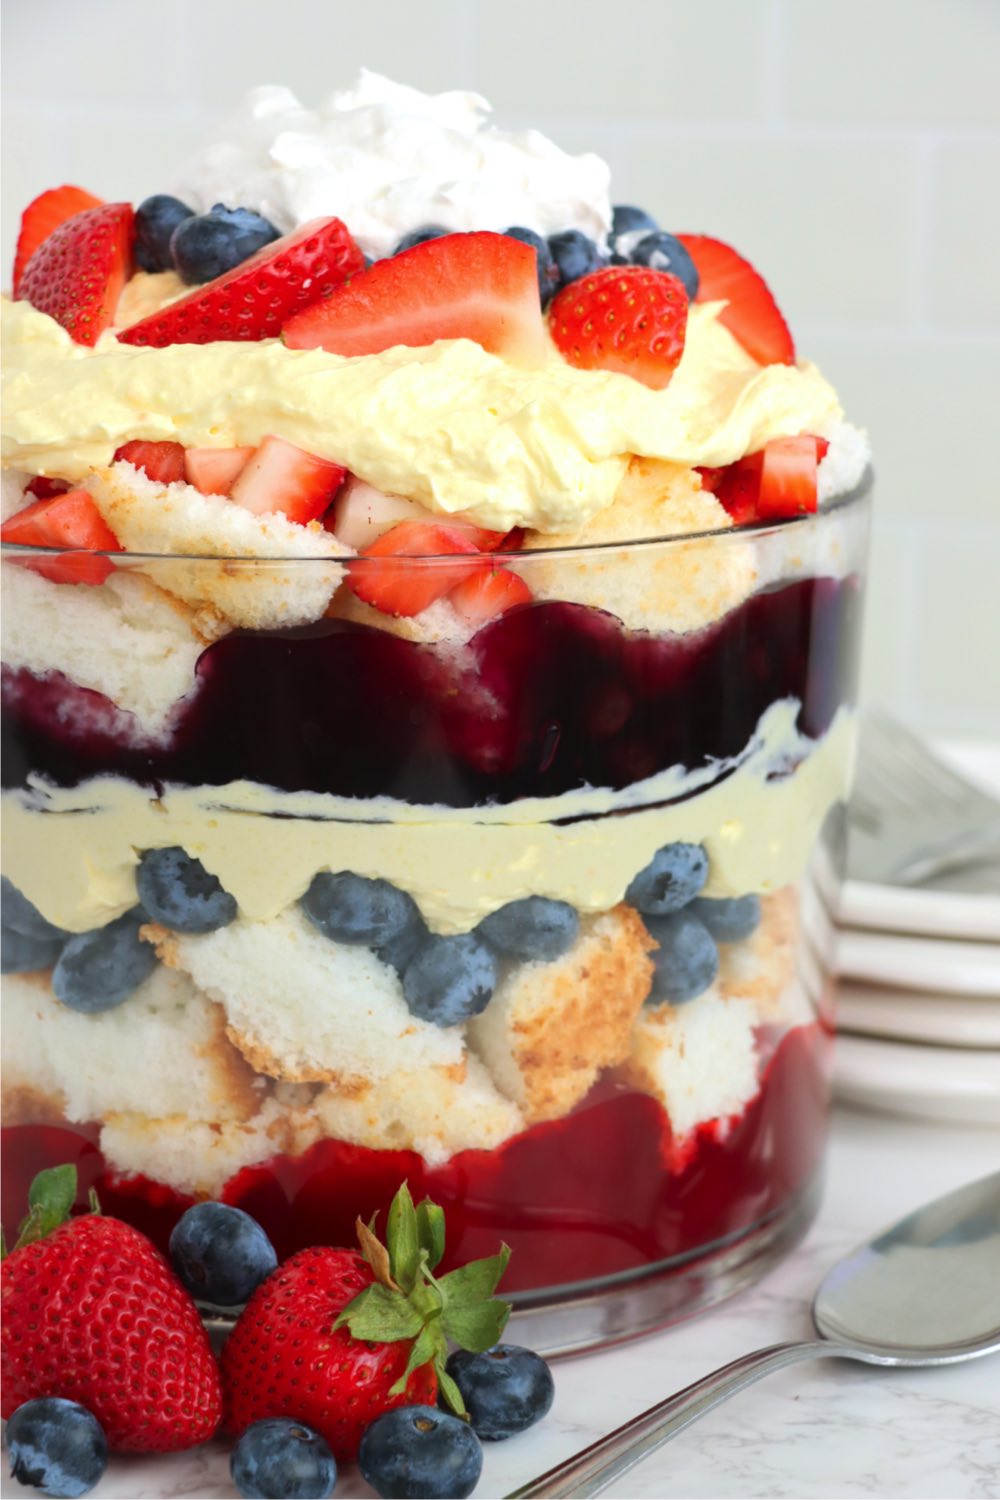 layers of cake, berries and pie filling